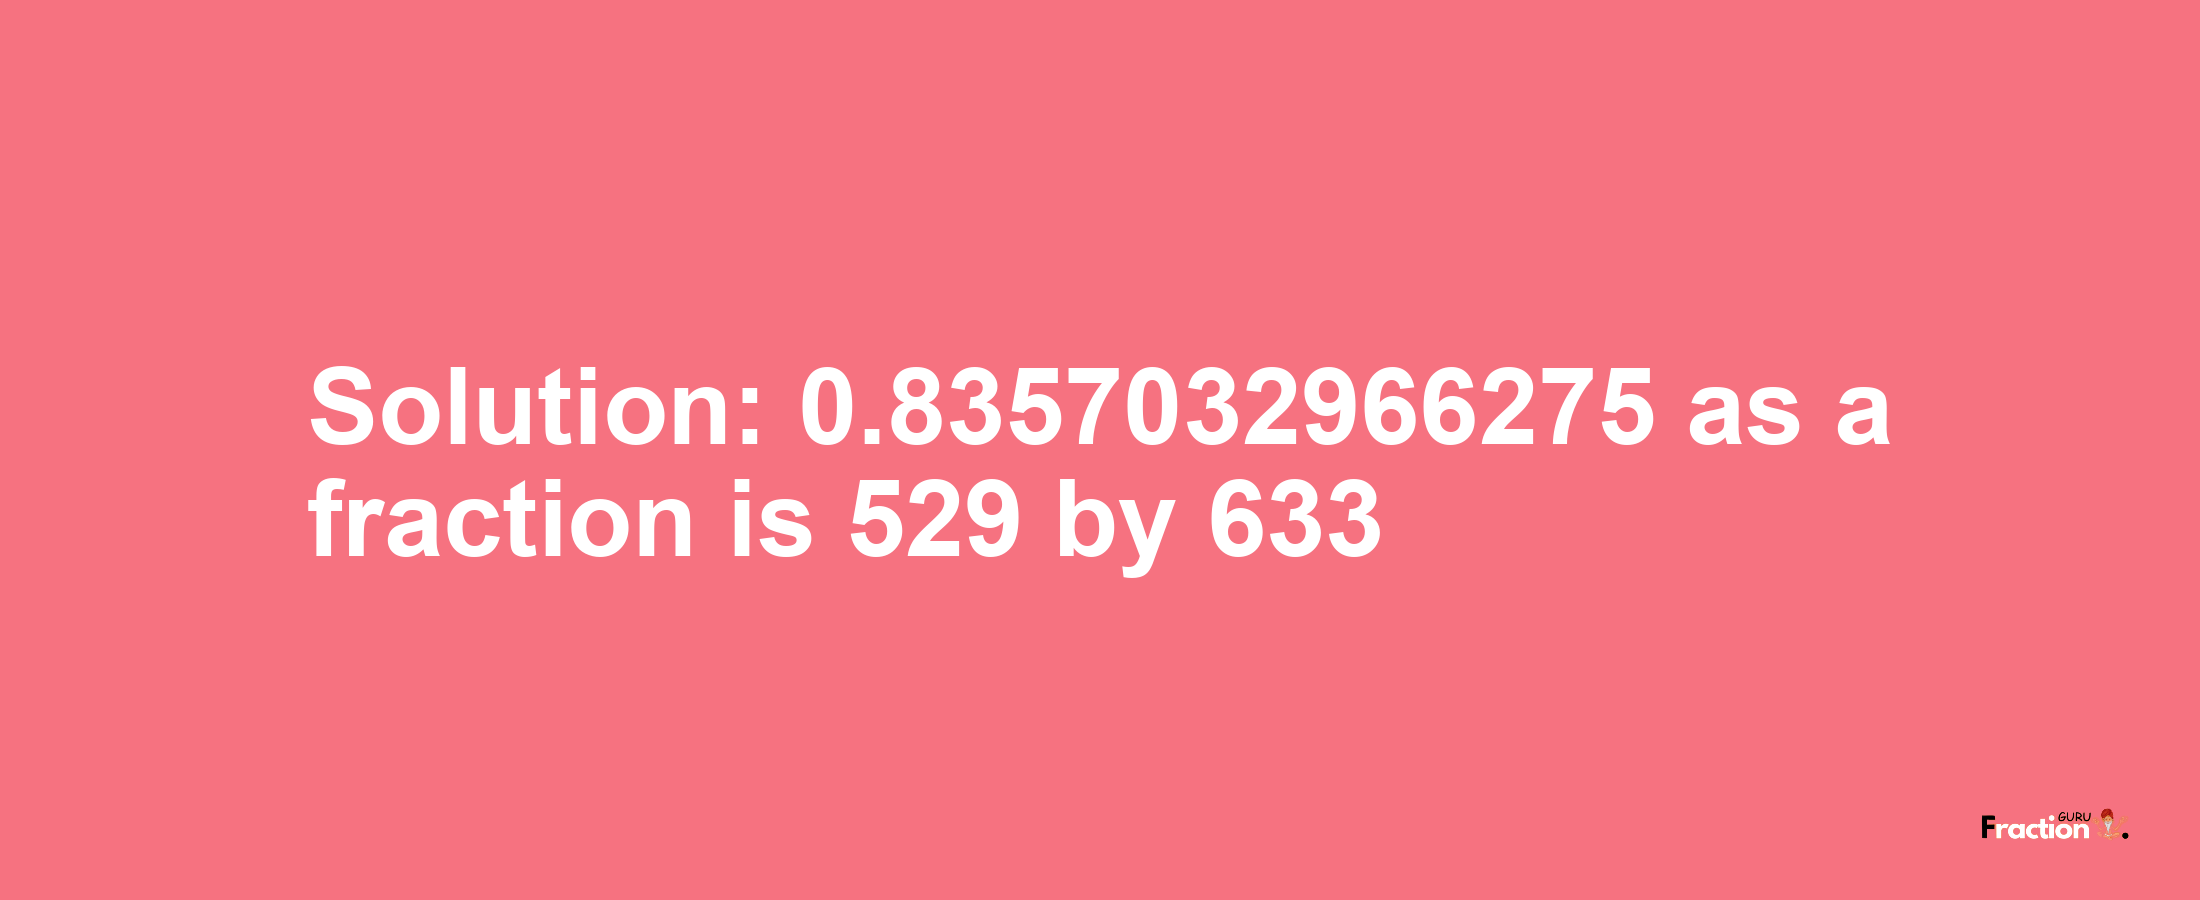 Solution:0.8357032966275 as a fraction is 529/633